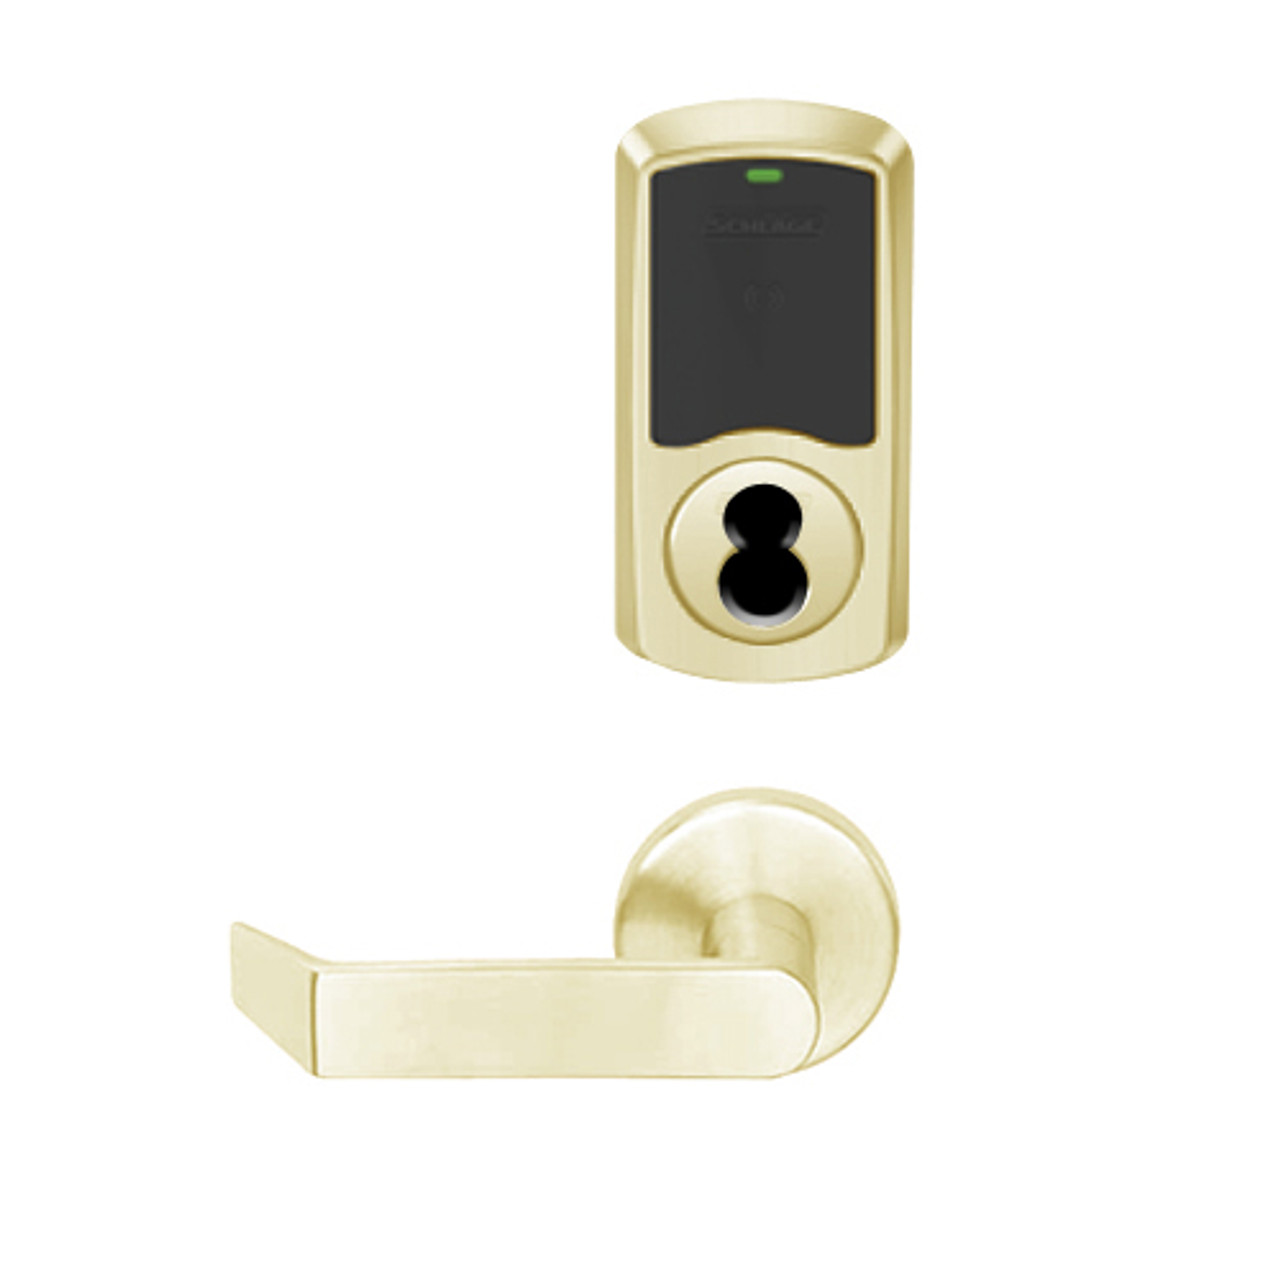 LEMB-GRW-BD-06-606-00C Schlage Privacy/Office Wireless Greenwich Mortise Lock with Push Button & LED Indicator and Rhodes Lever Prepped for SFIC in Satin Brass